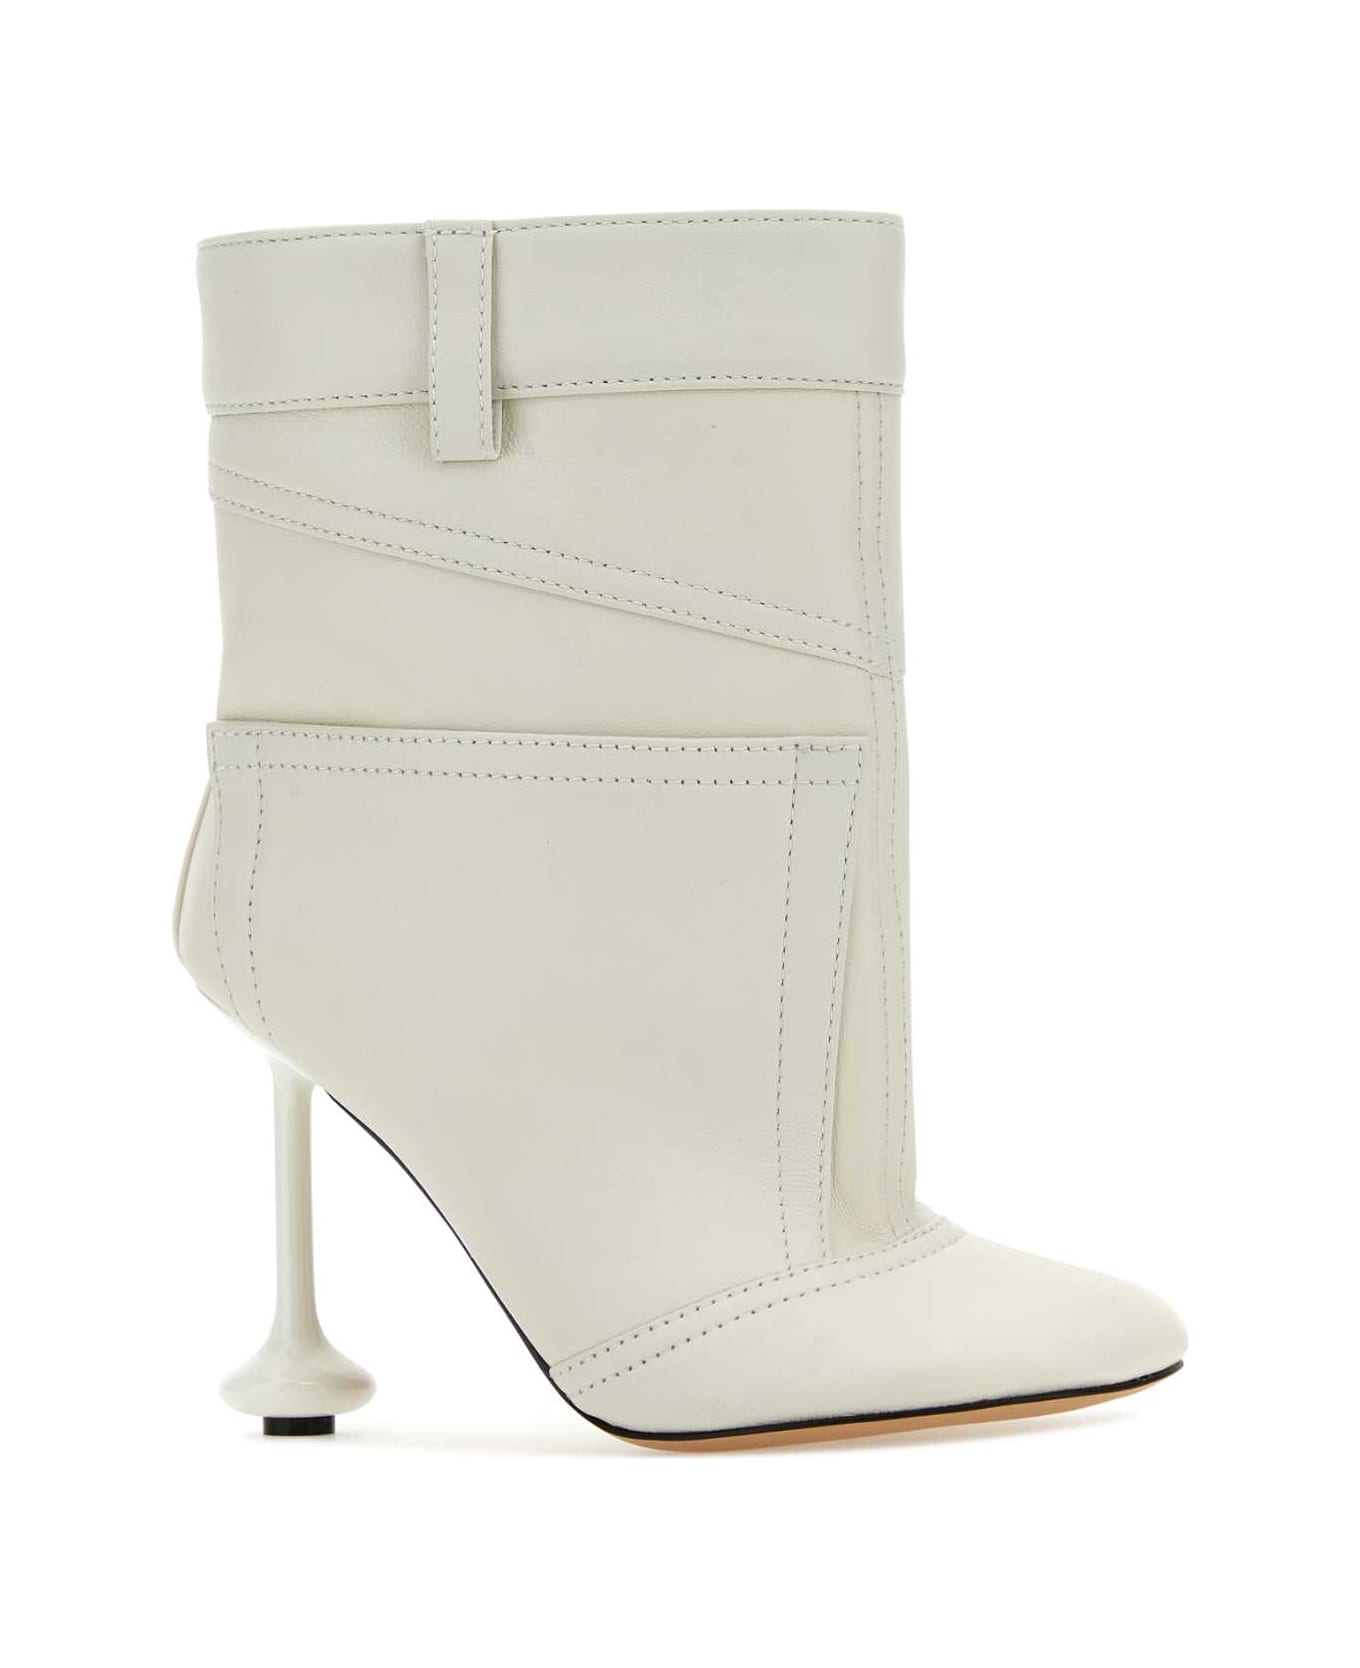 Loewe Ivory Nappa Leather Toy Ankle Boots - ANTHURIUMWHITE ブーツ